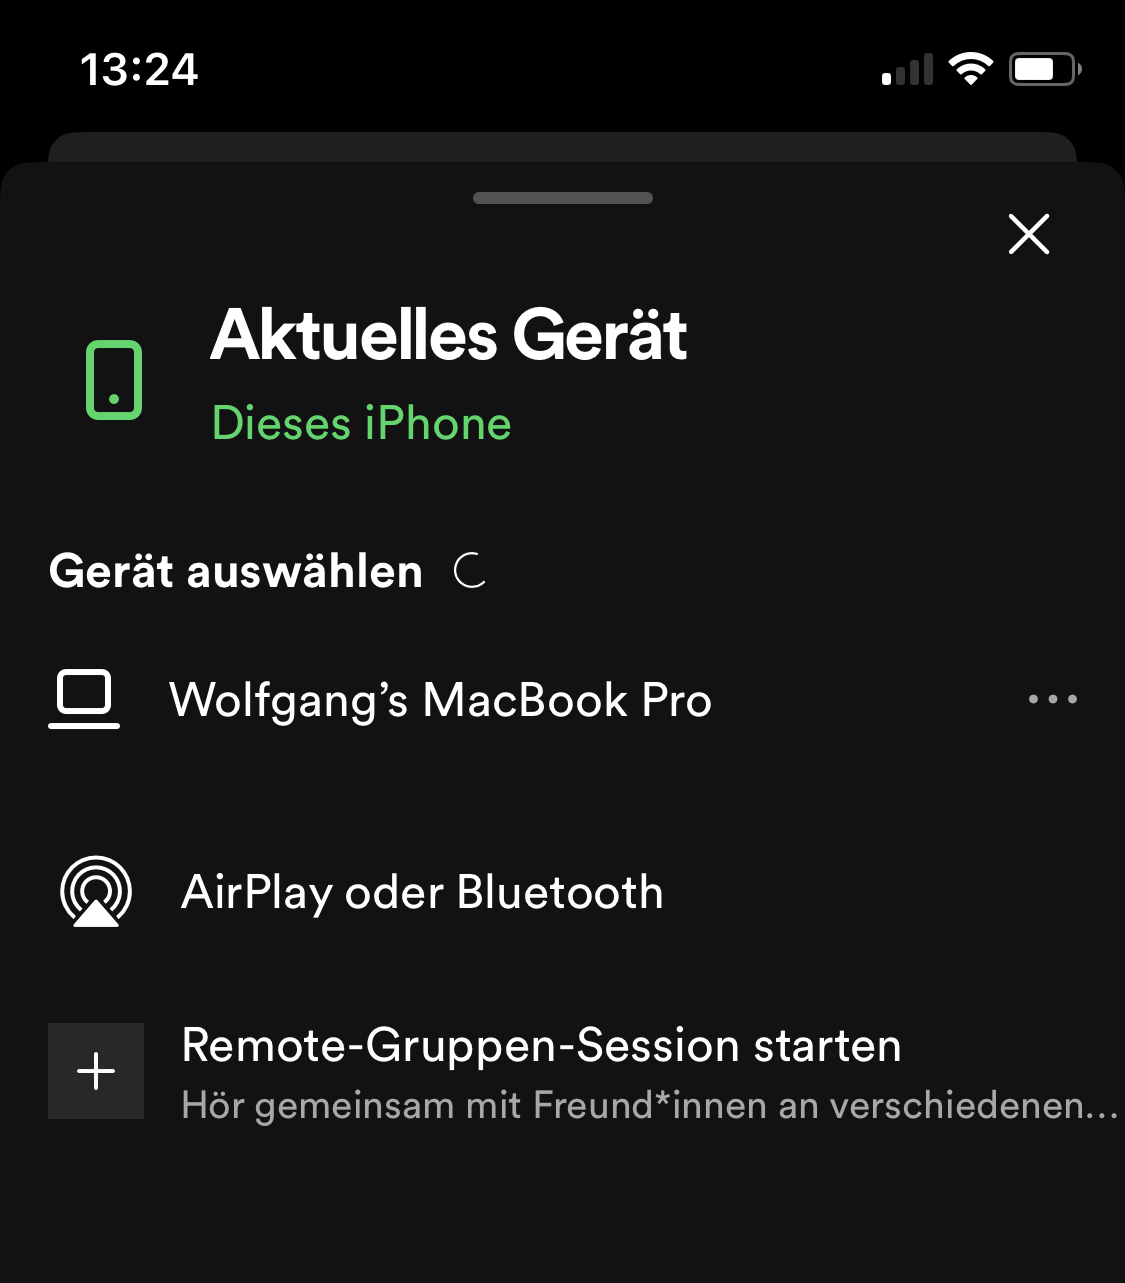 Echo devices do not show in Spotify